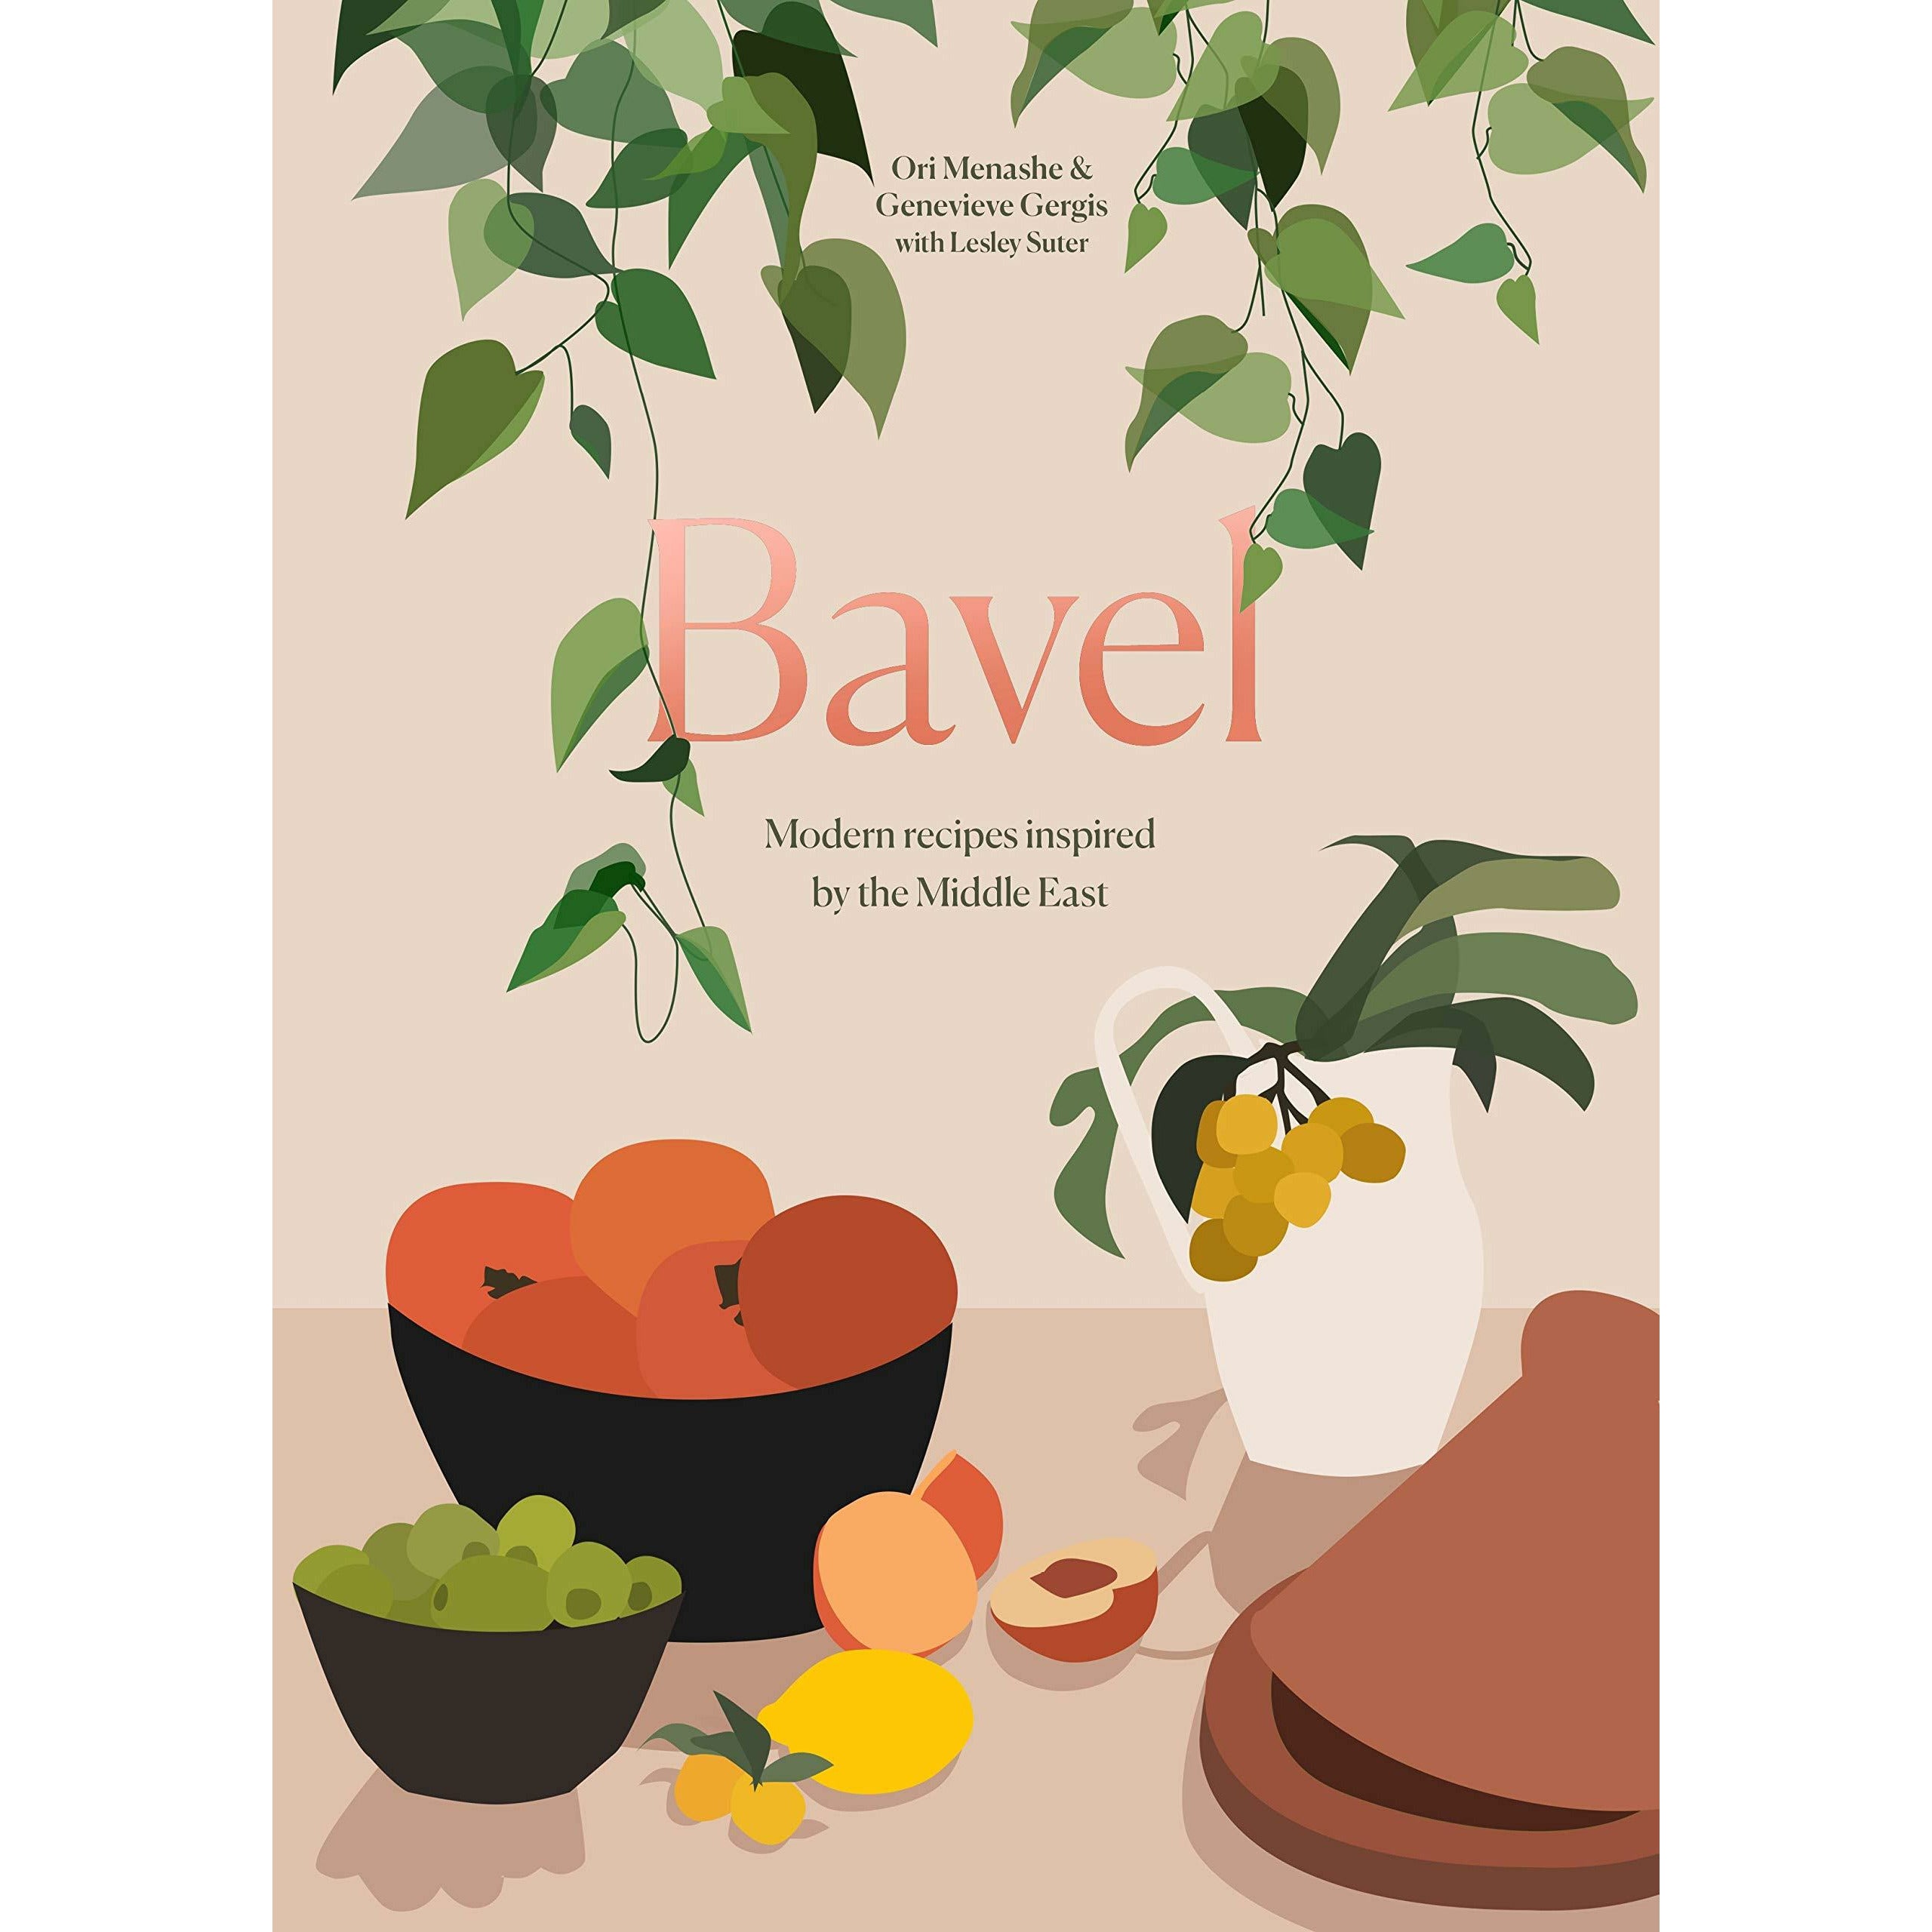 Bavel: Modern Recipes Inspired by the Middle East [A Cookbook] Hardcover – May 25, 2021